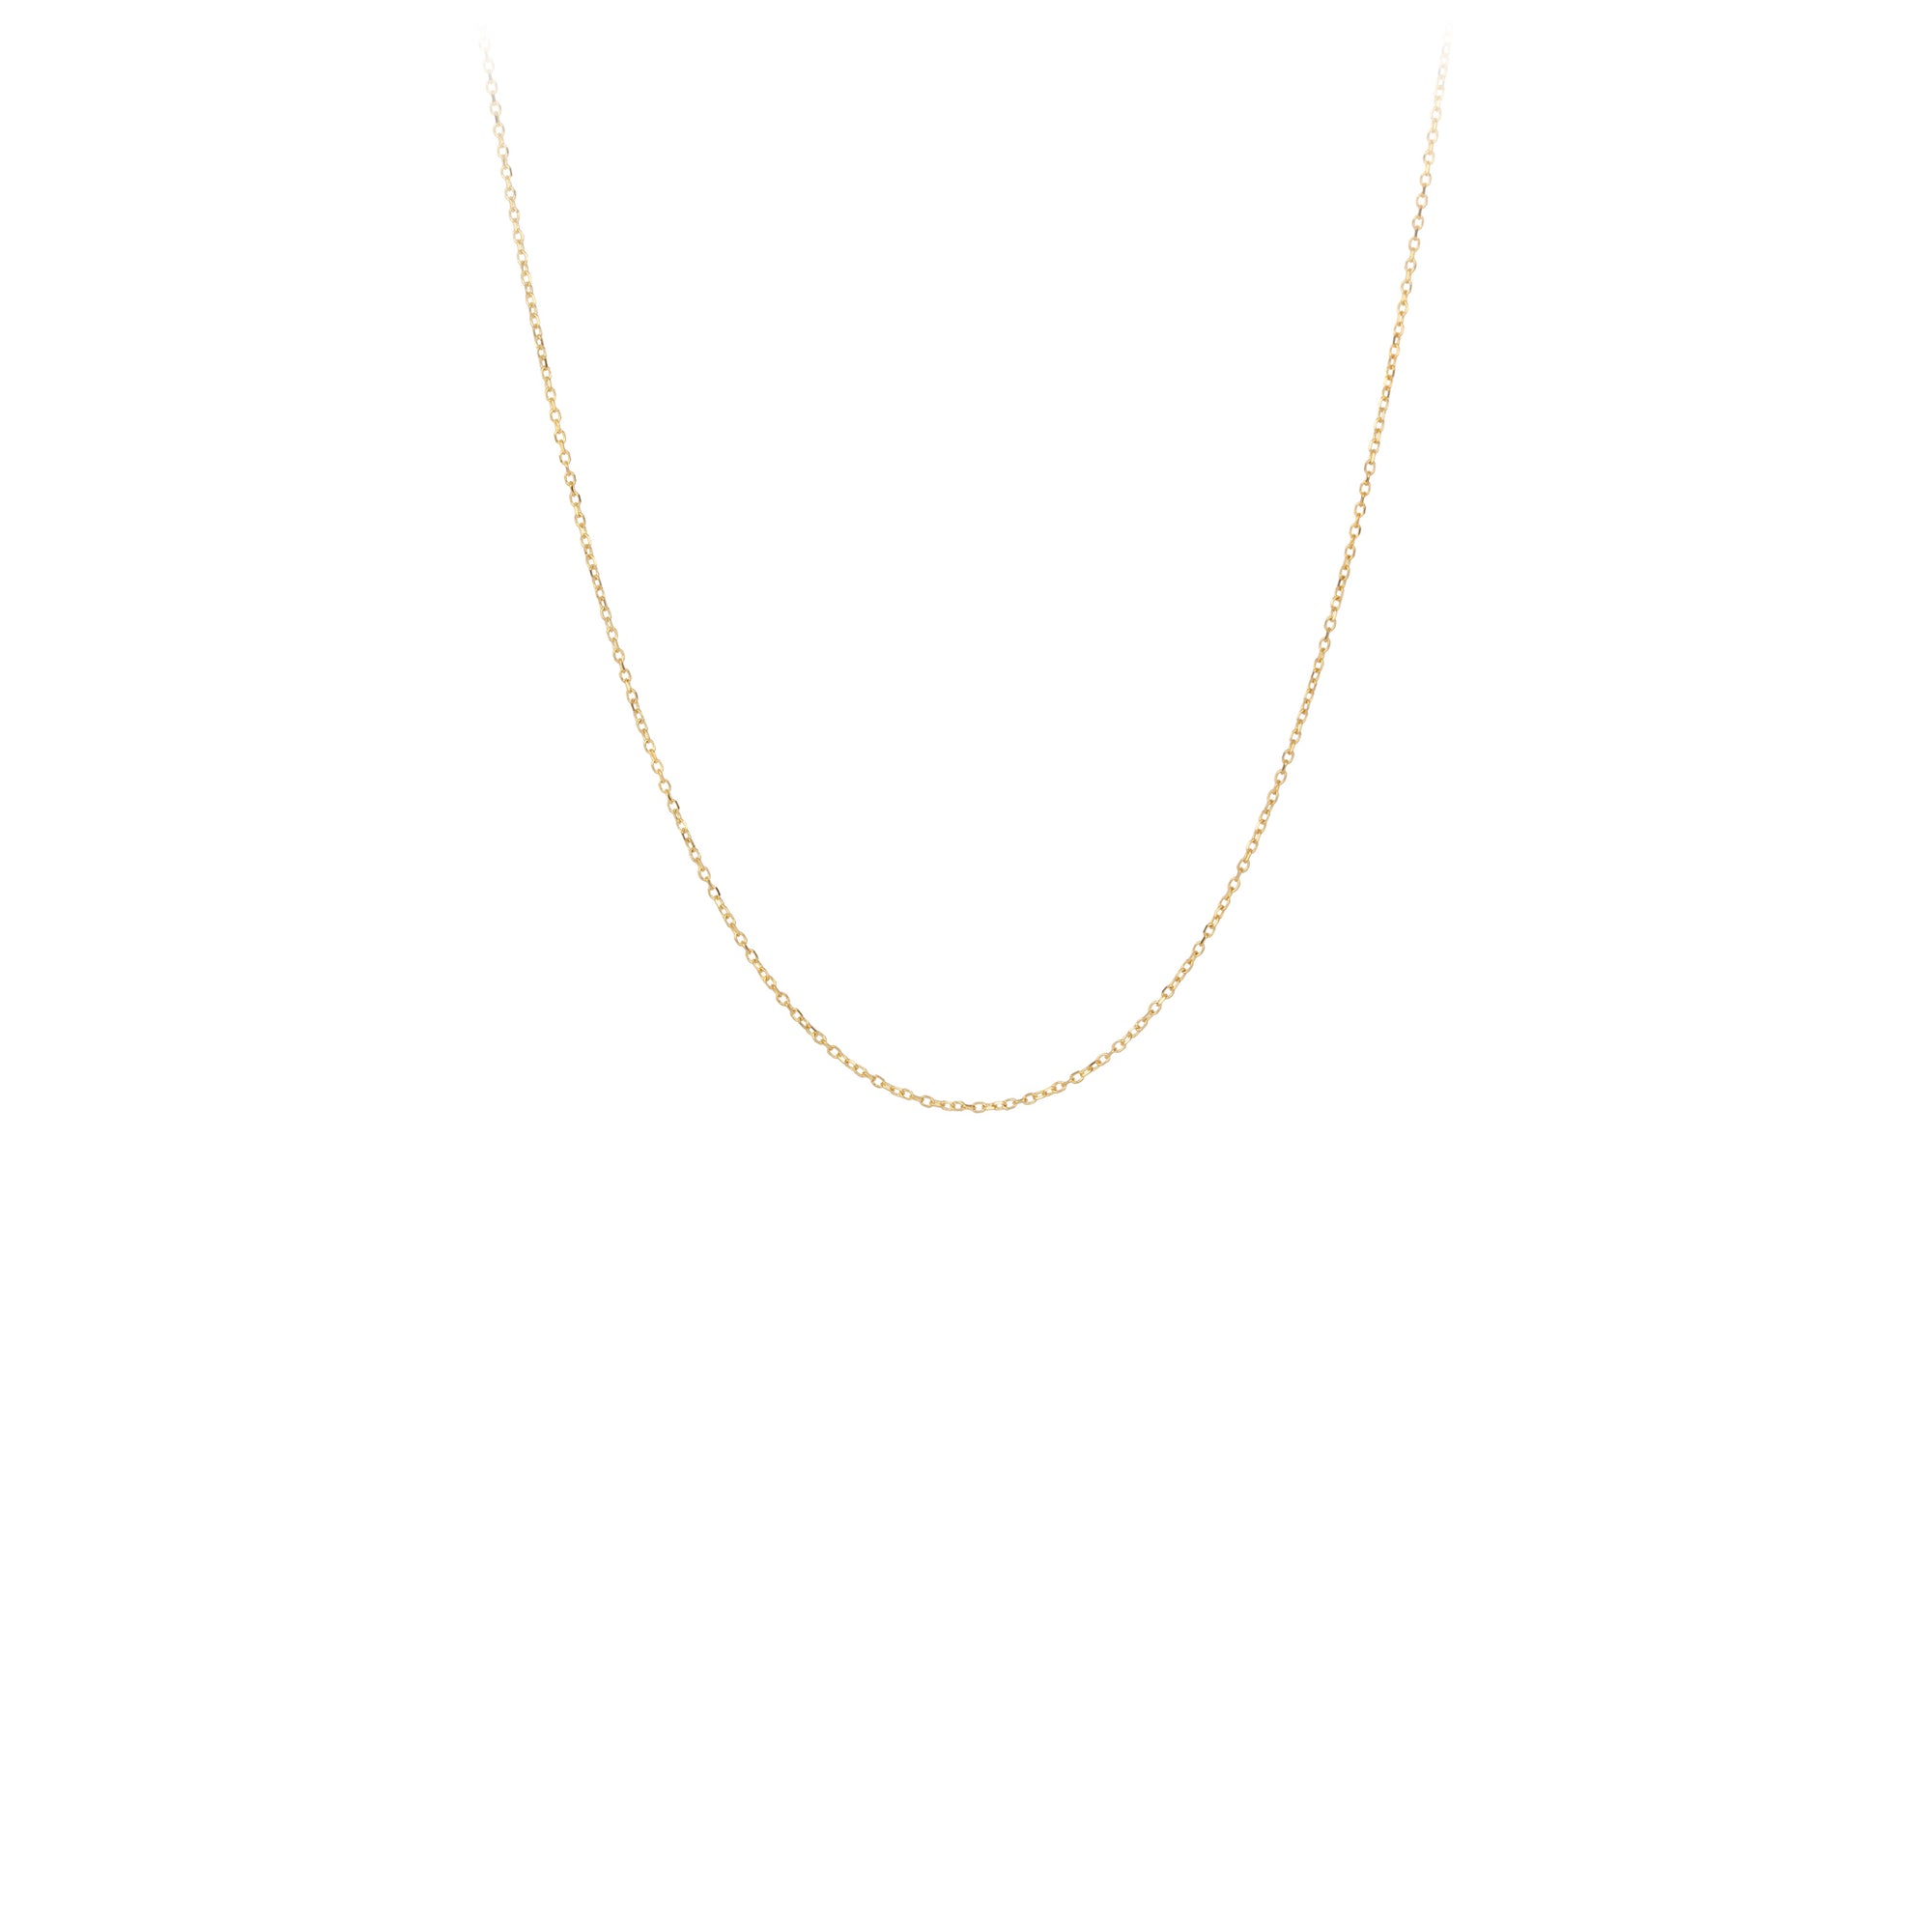 A 14k gold chain with beveled oval cable links.